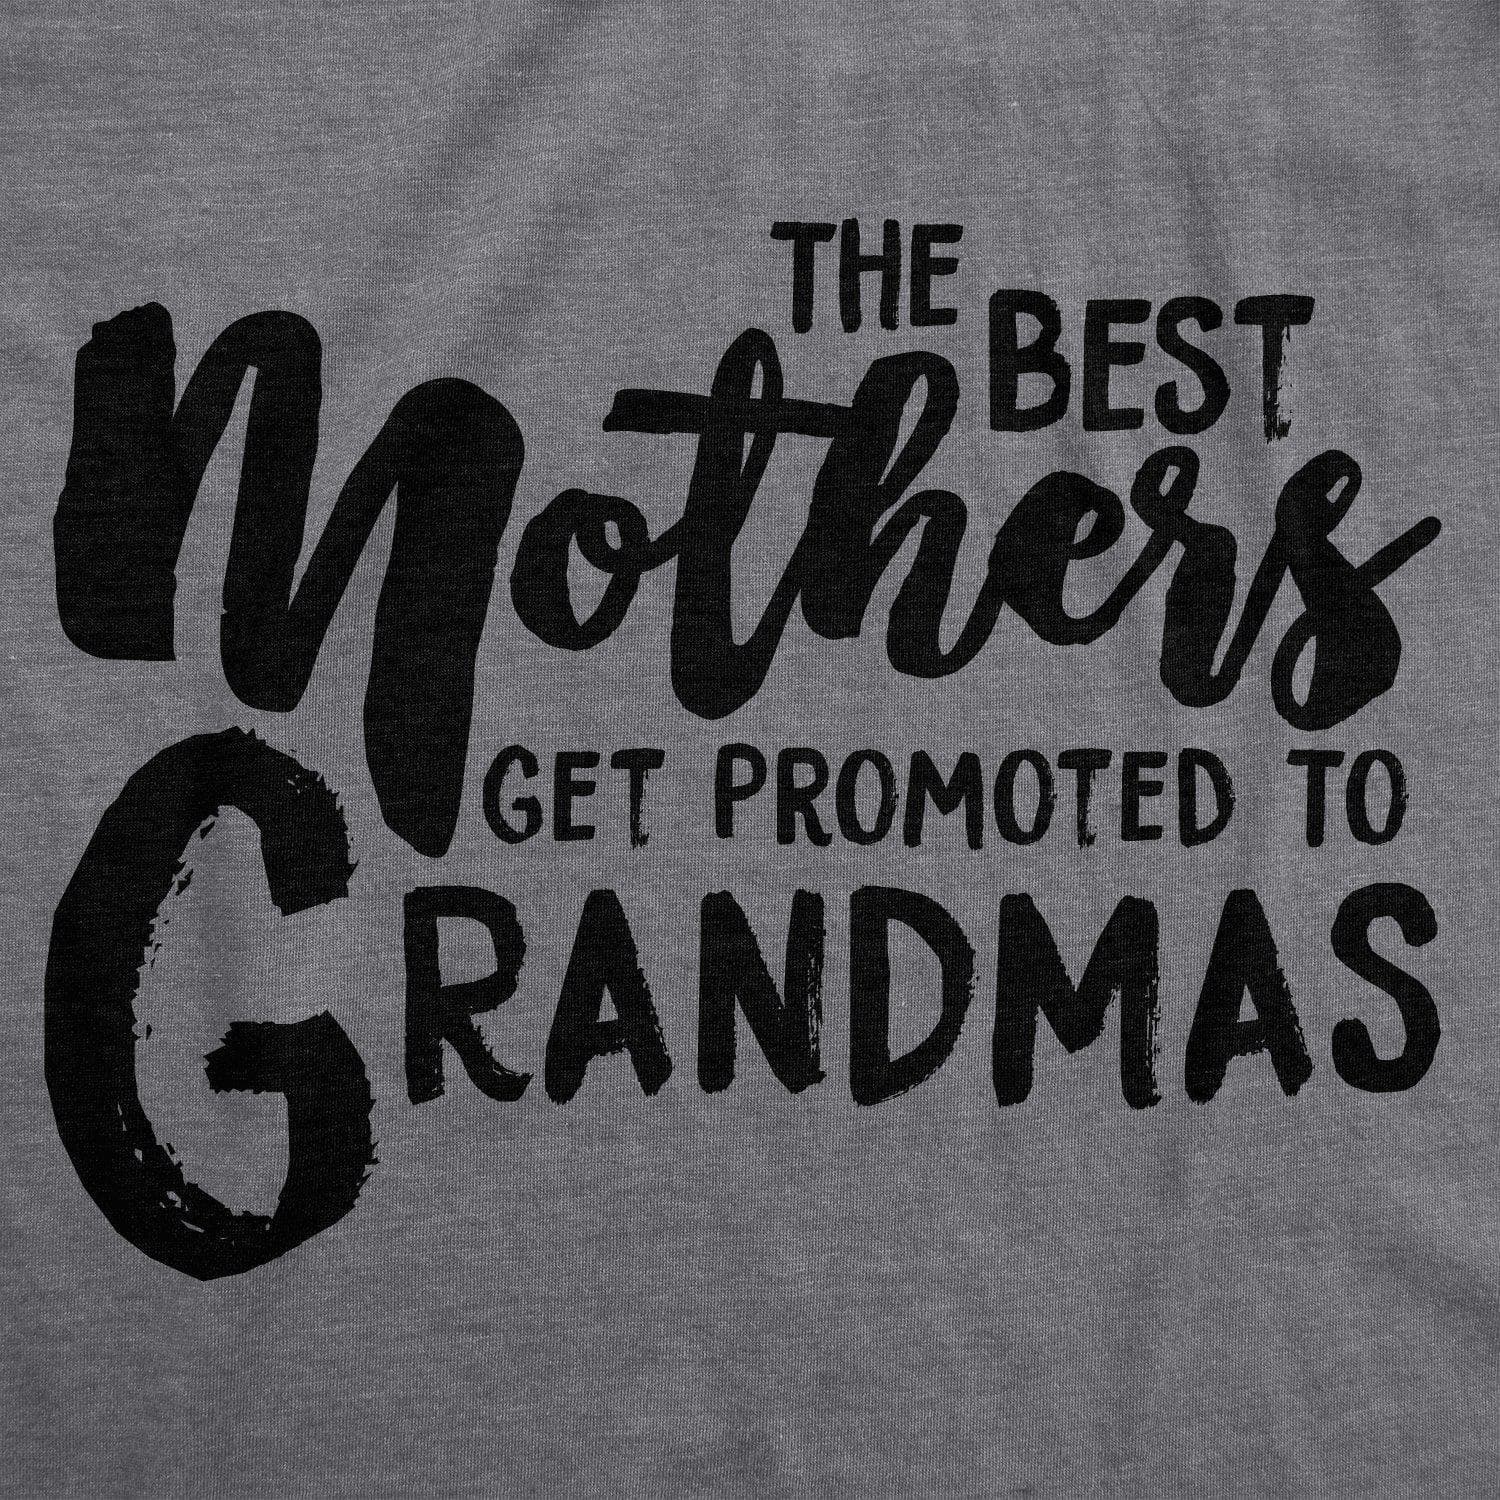 The Best Mothers Get Promoted To Grandmas Women's Tshirt  -  Crazy Dog T-Shirts